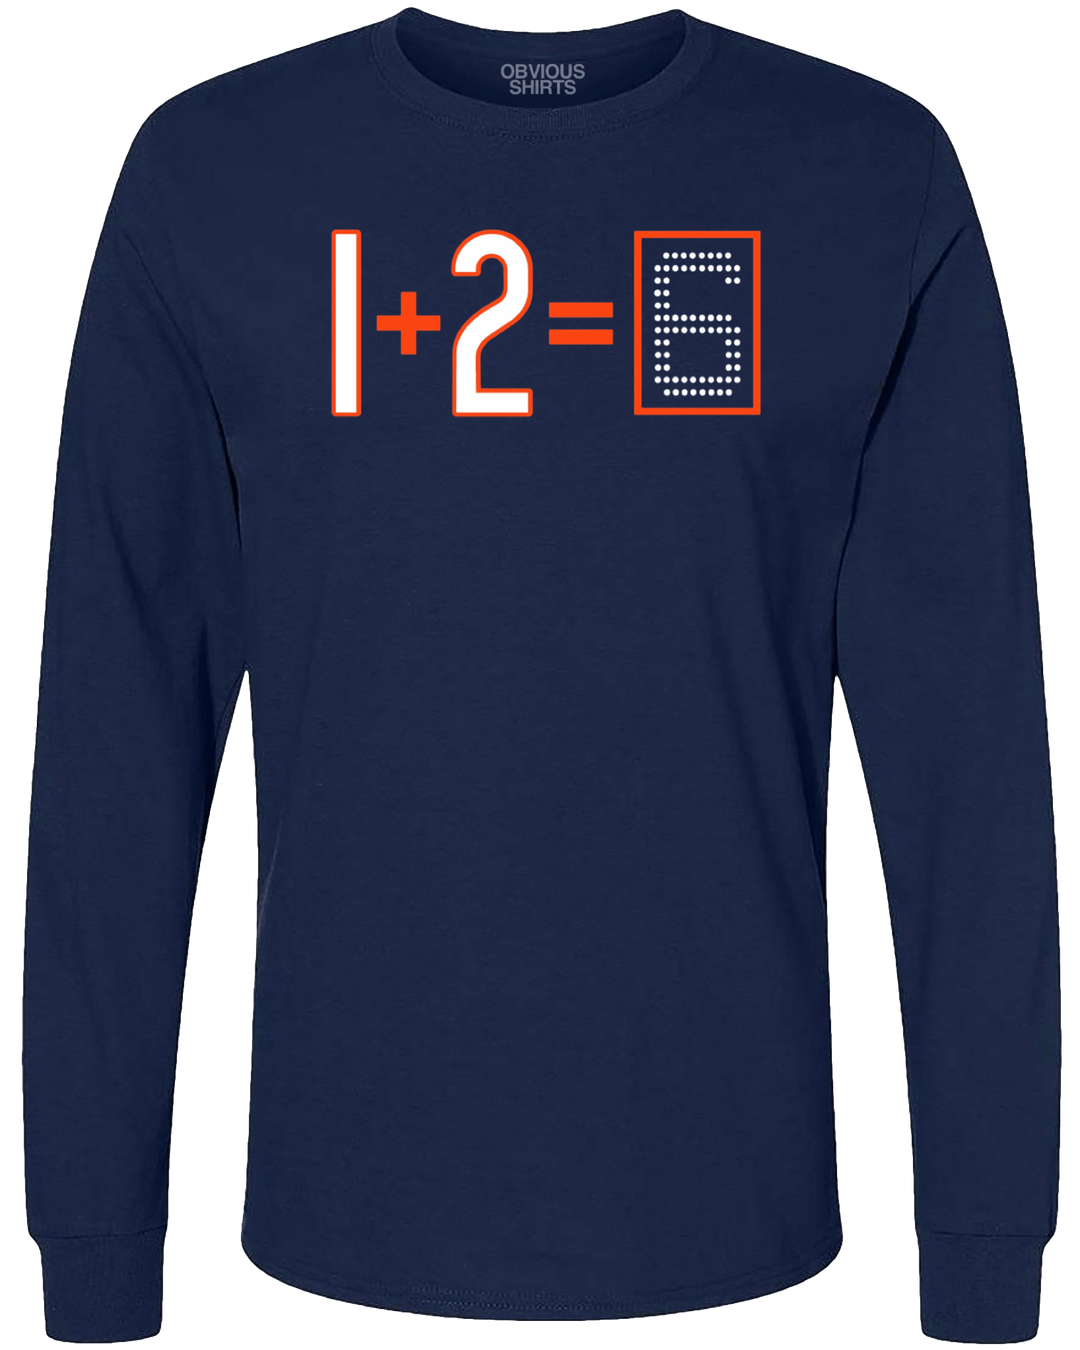 1+2=6 (LONG SLEEVE) - OBVIOUS SHIRTS